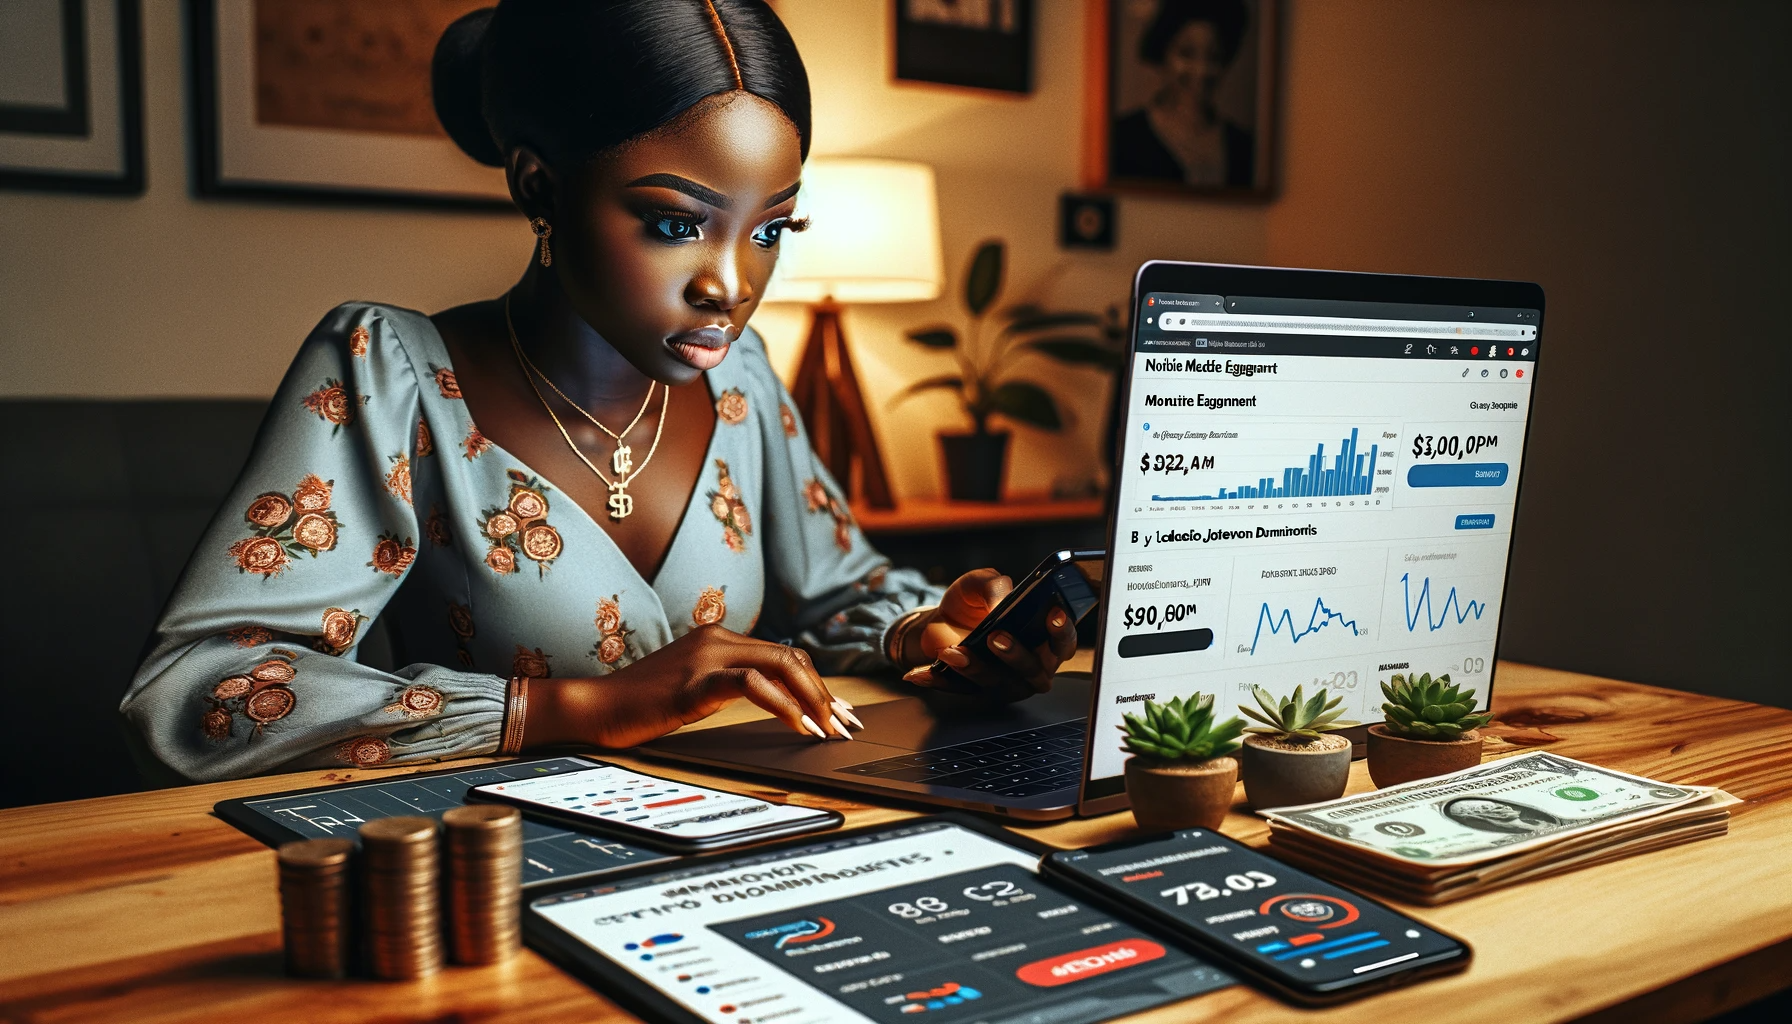 A Nigerian student managing a social media account, turning engagement into income